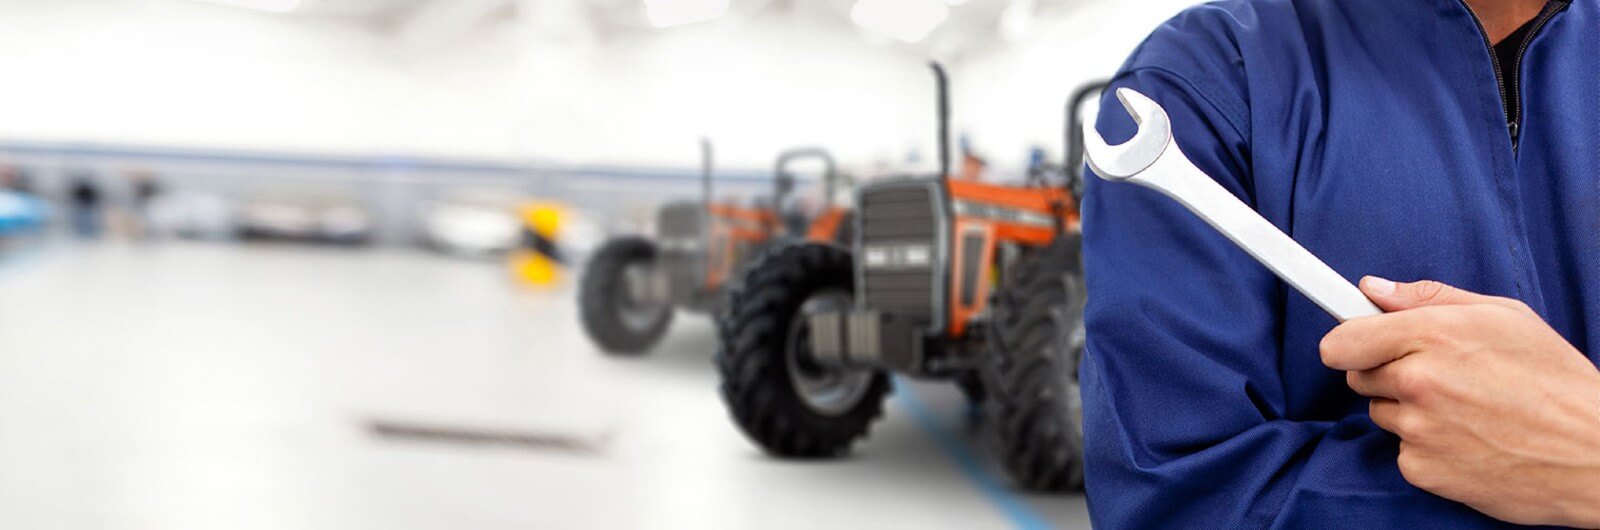 TAFE Tractor Service and Parts